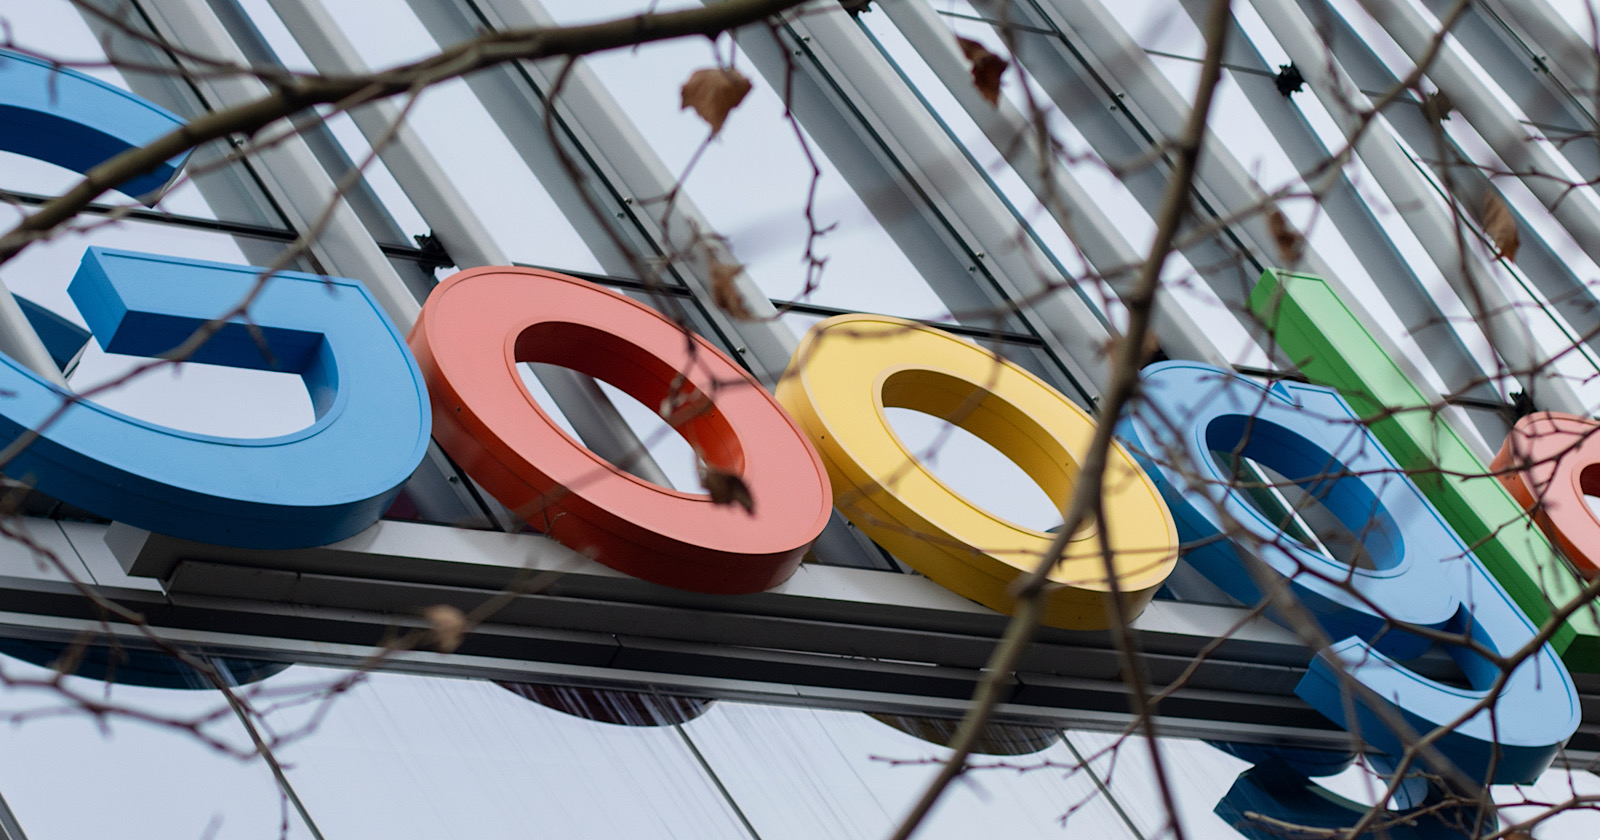 Google logo is seen at its South Lake Union campus in Seattle, Washington. Google LLC is a global technology company headquartered in Mountain View, California.